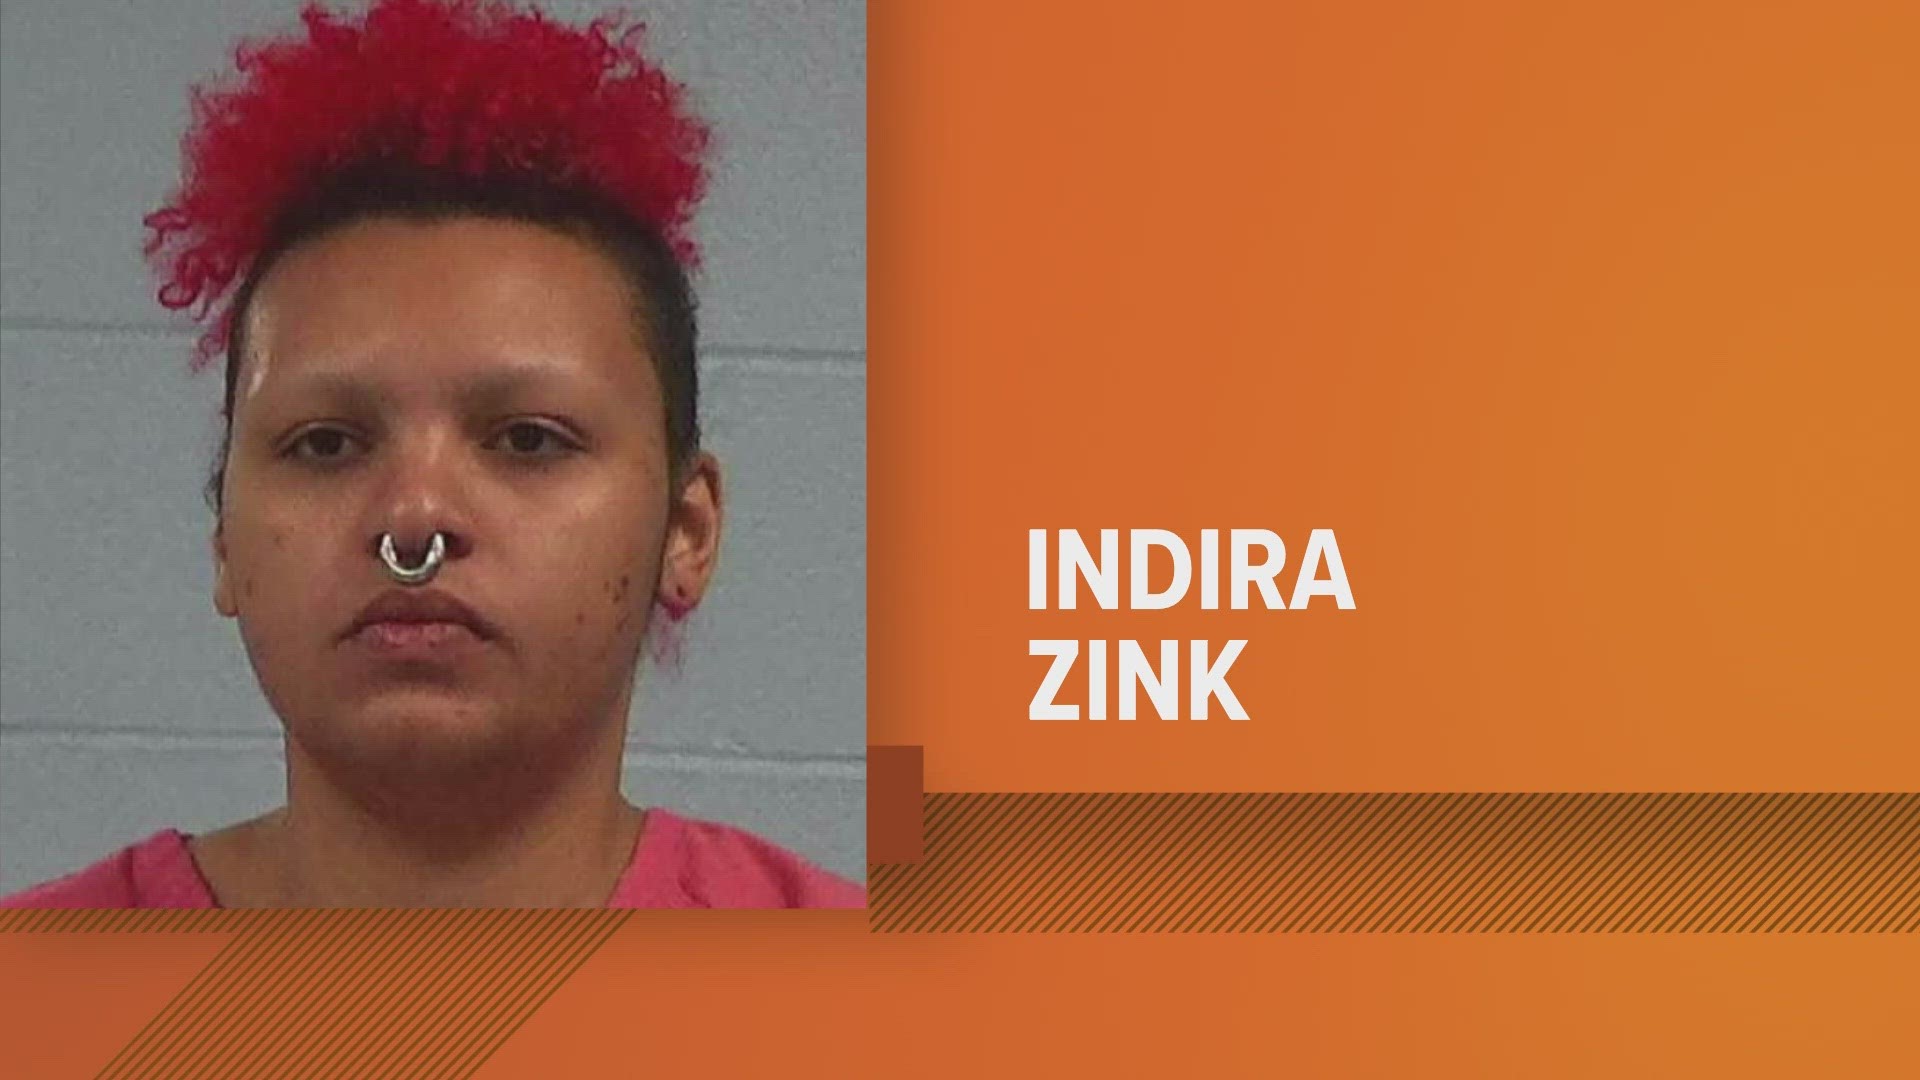 Indira Zink was arrested Feb. 23 by the Lone Star Fugitive Task Force.